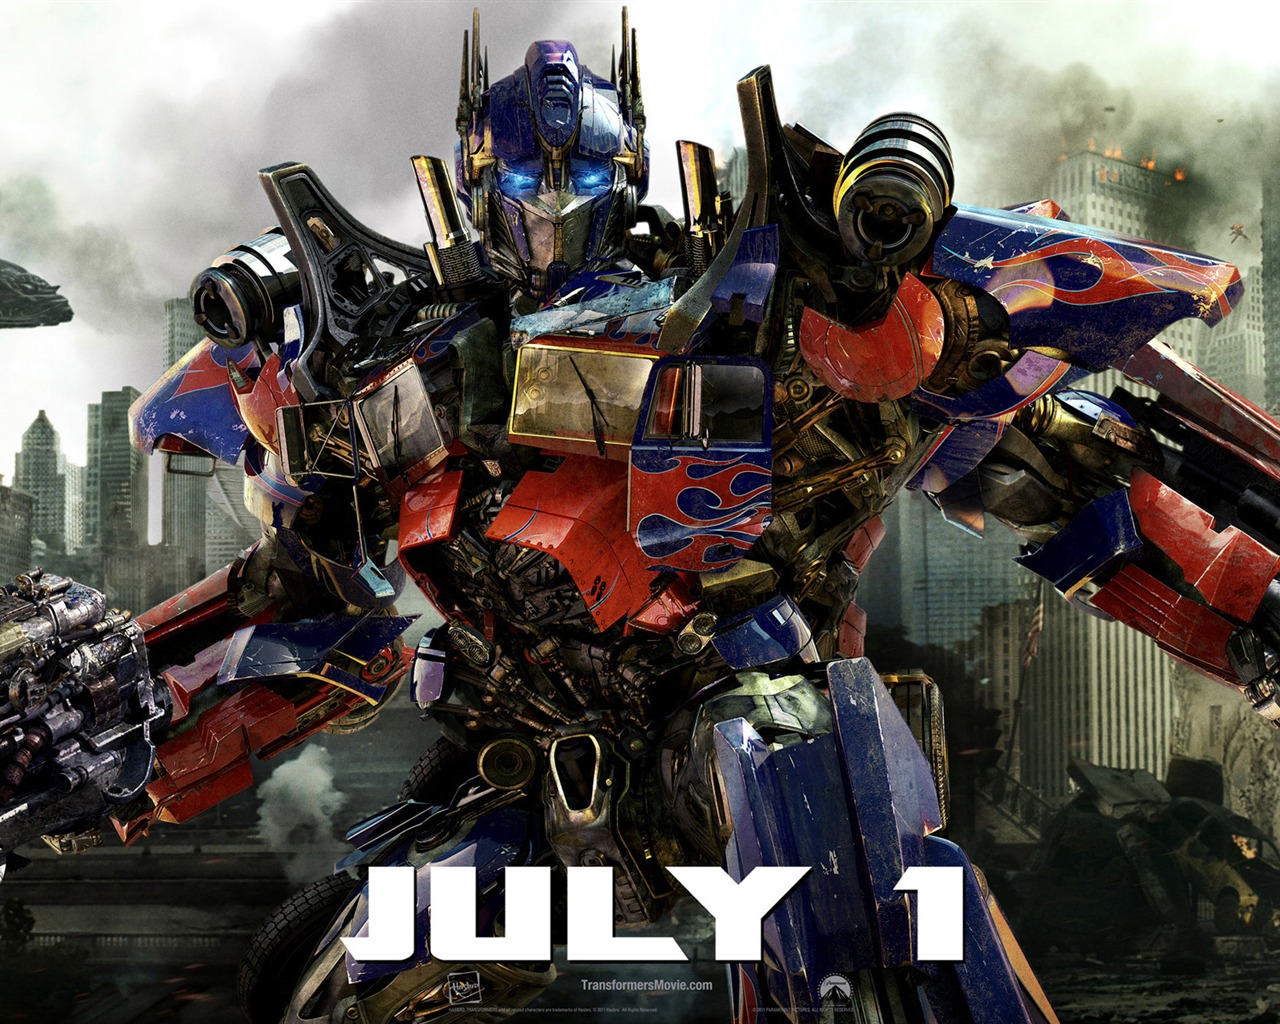 Transformers: The Dark Of The Moon HD wallpapers #1 - 1280x1024